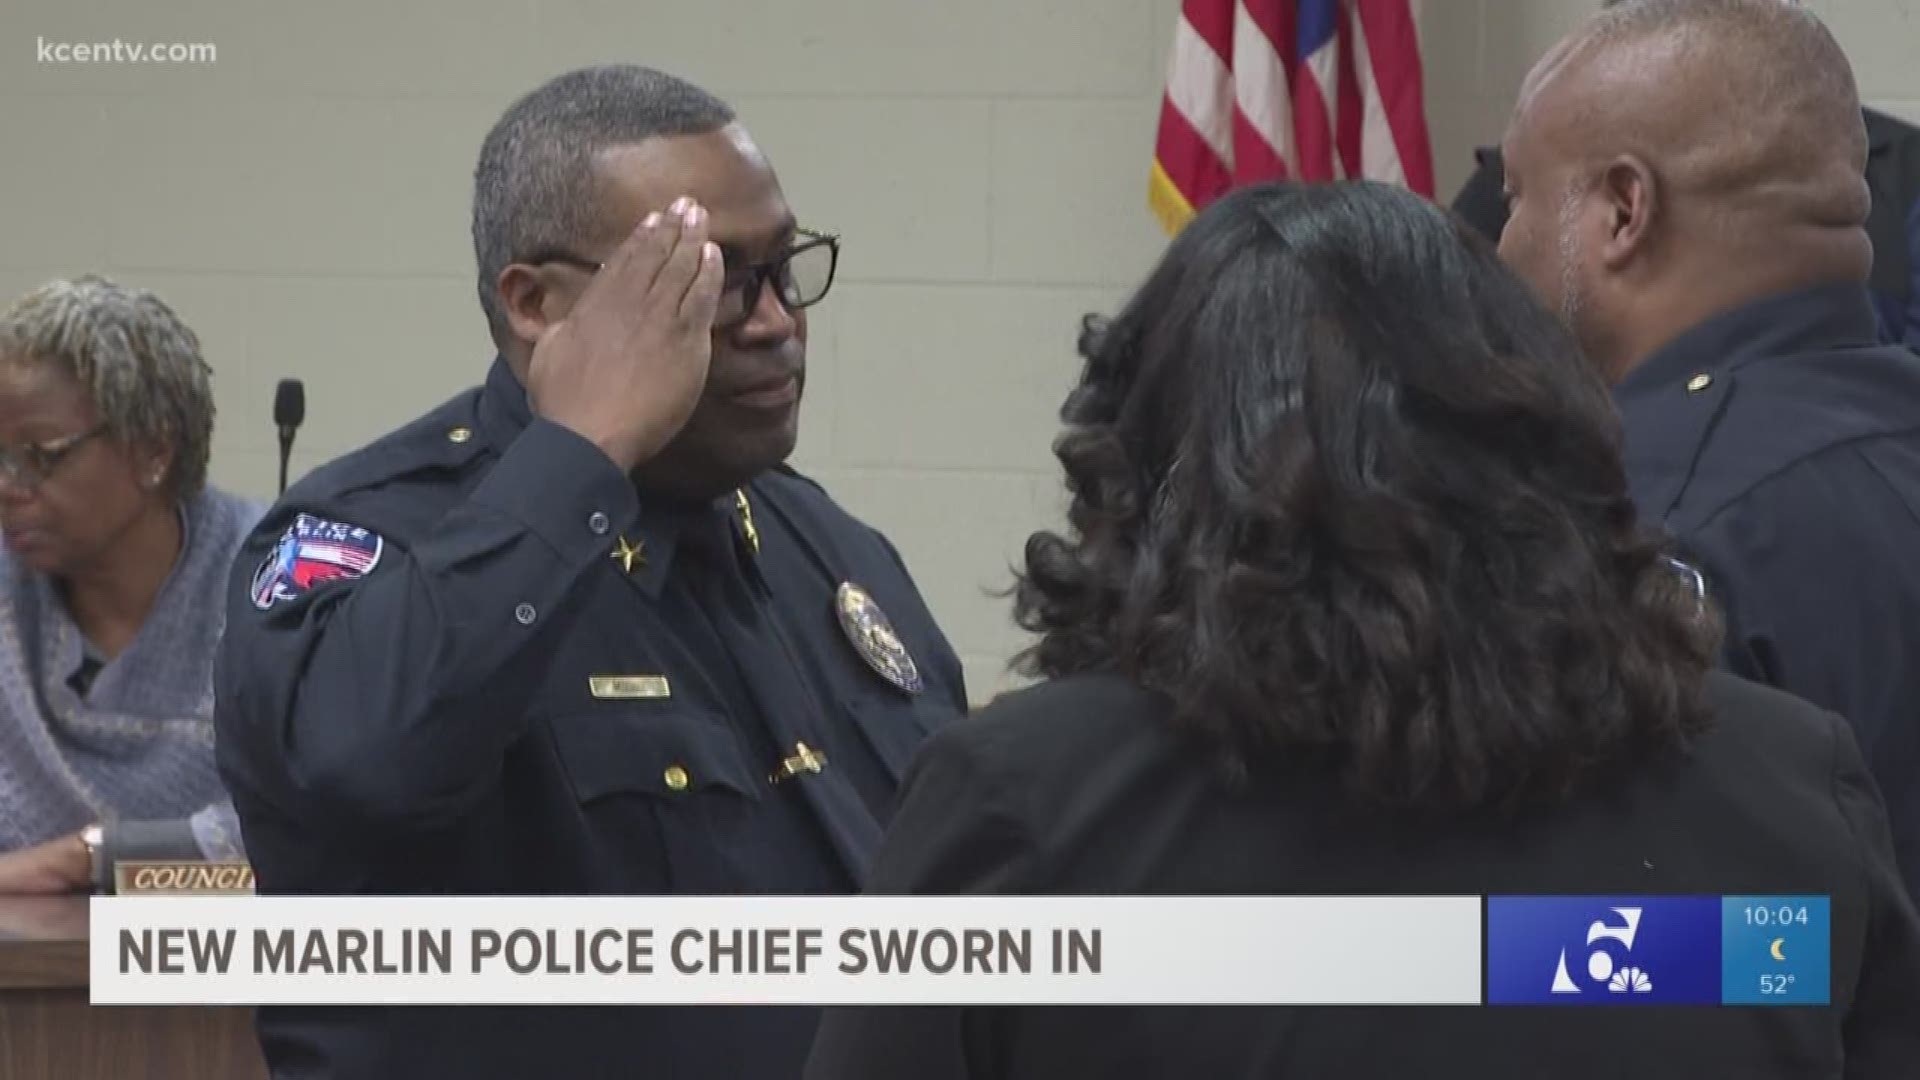 Lawrence McCall was sworn in as the Marlin police chief Tuesday.